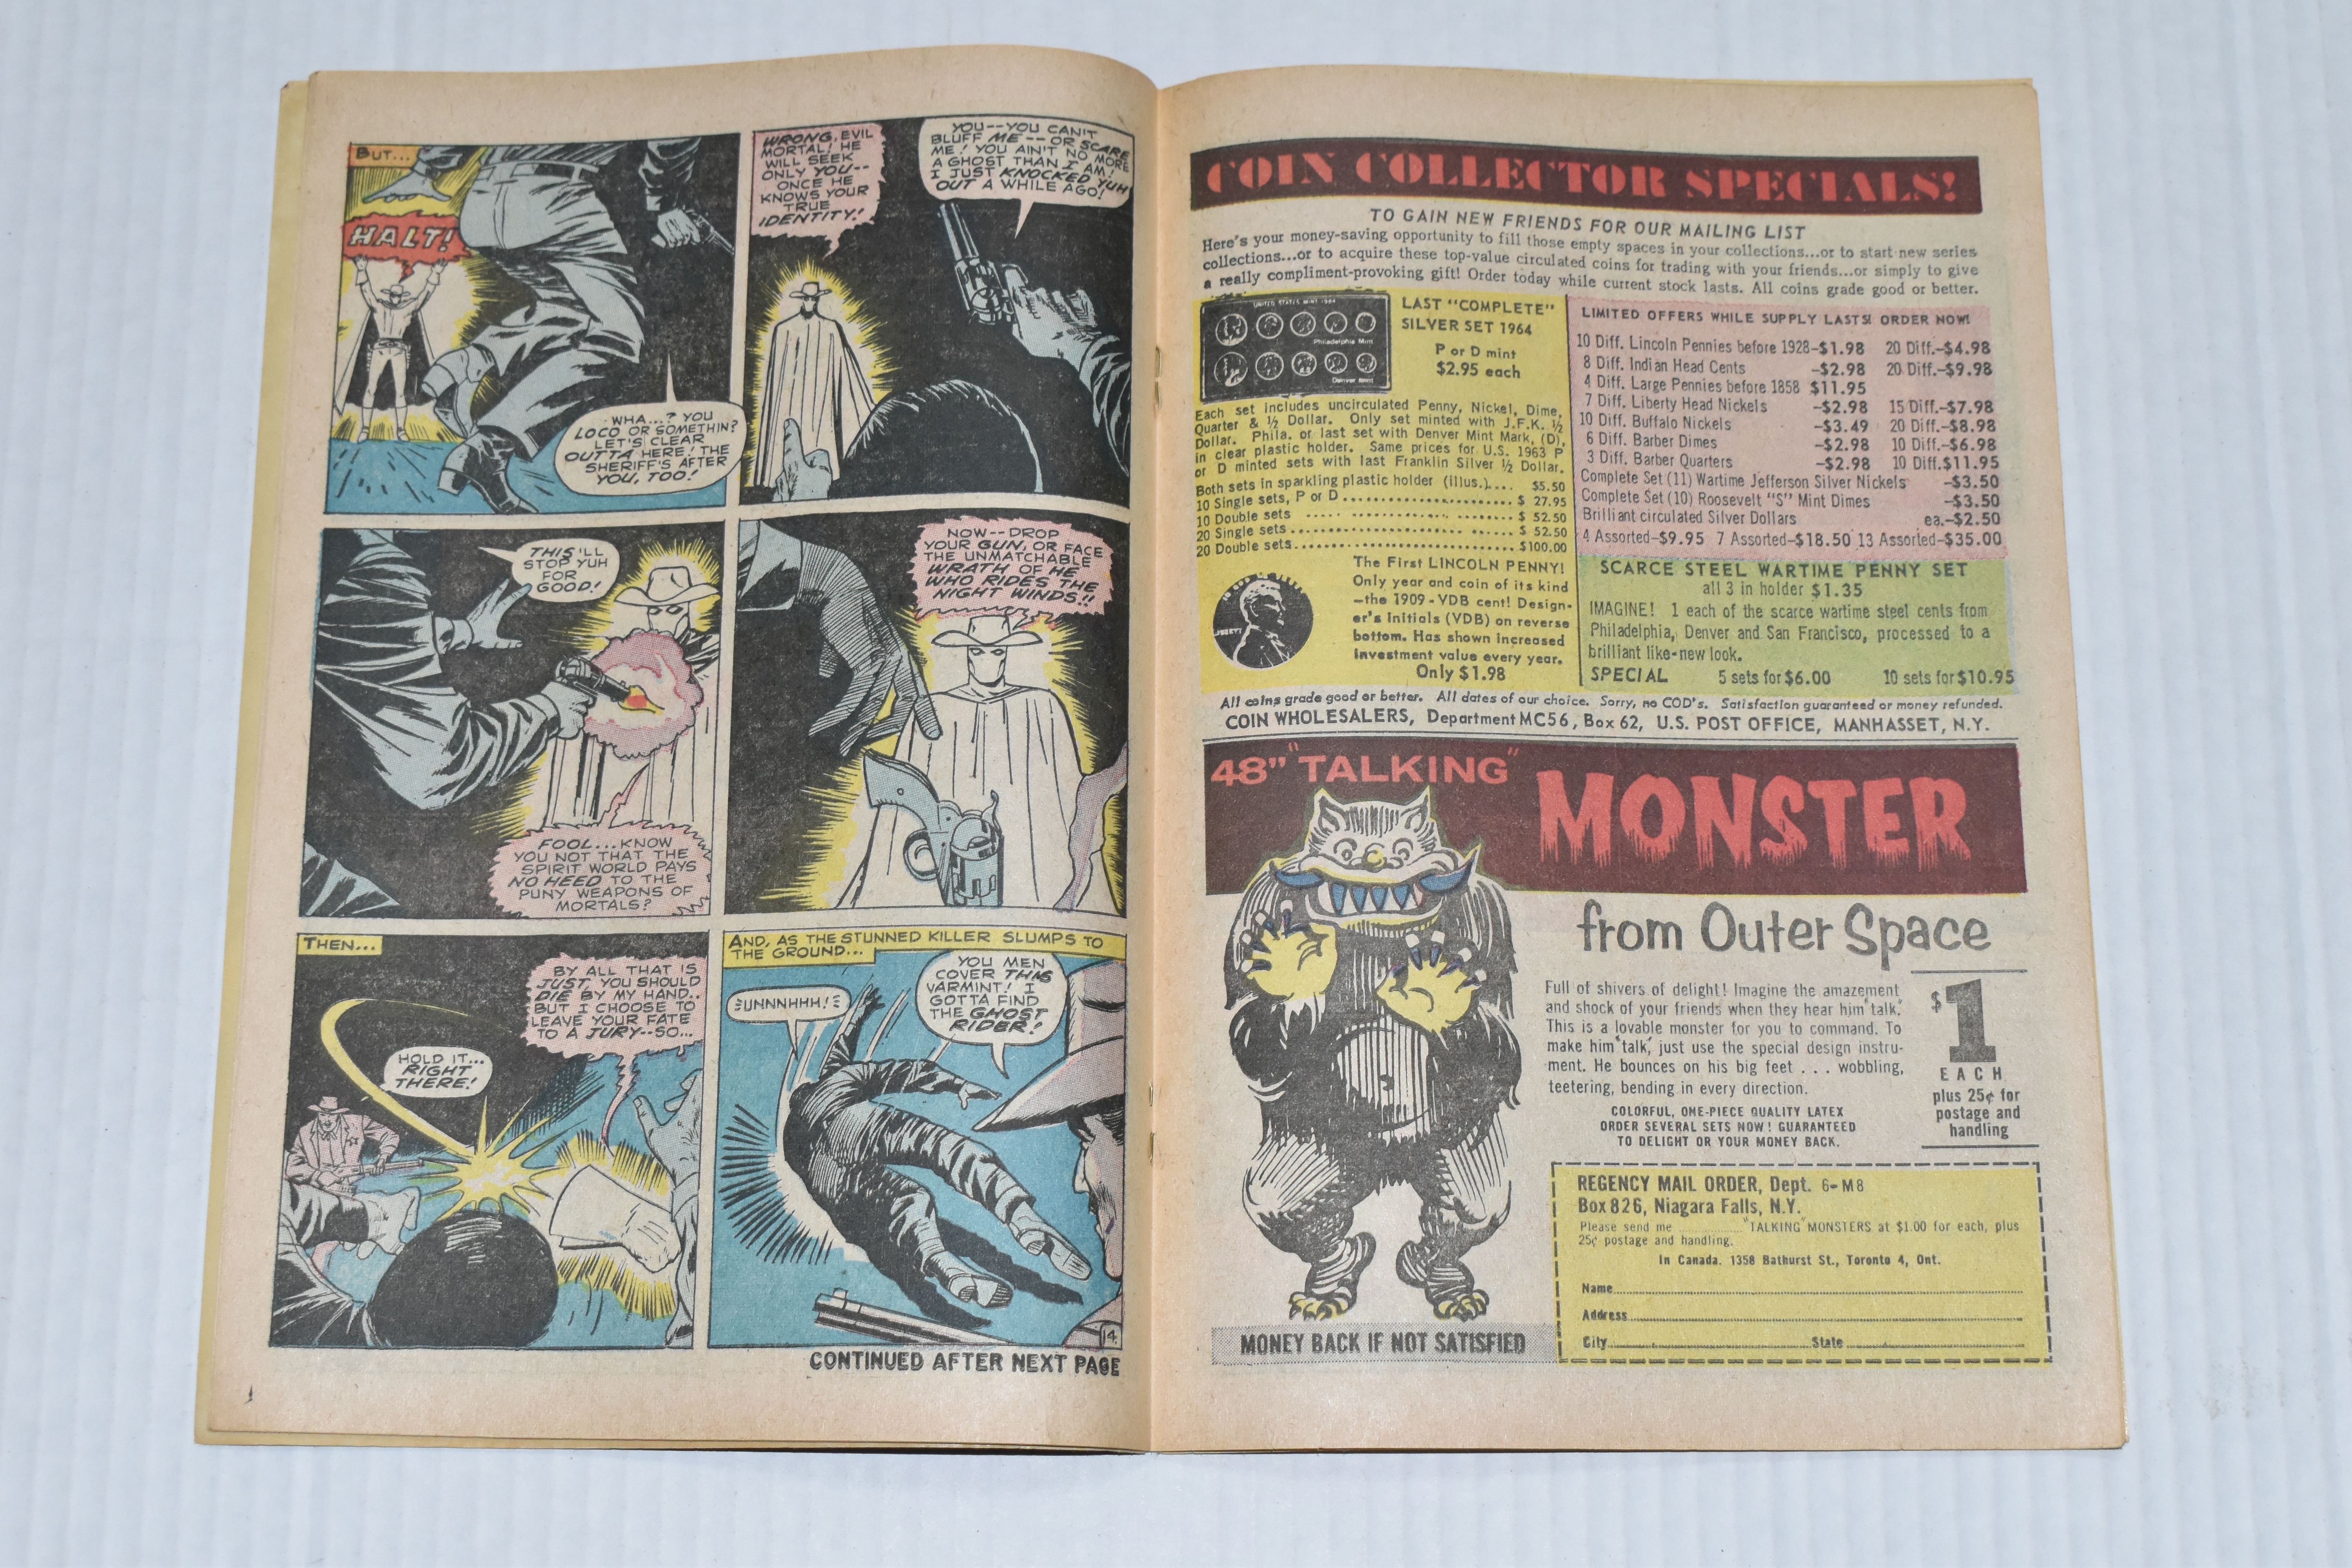 COMPLETE ORIGINAL GHOST RIDER VOLUME 1 MARVEL COMICS, features the first appearance of the - Image 19 of 25